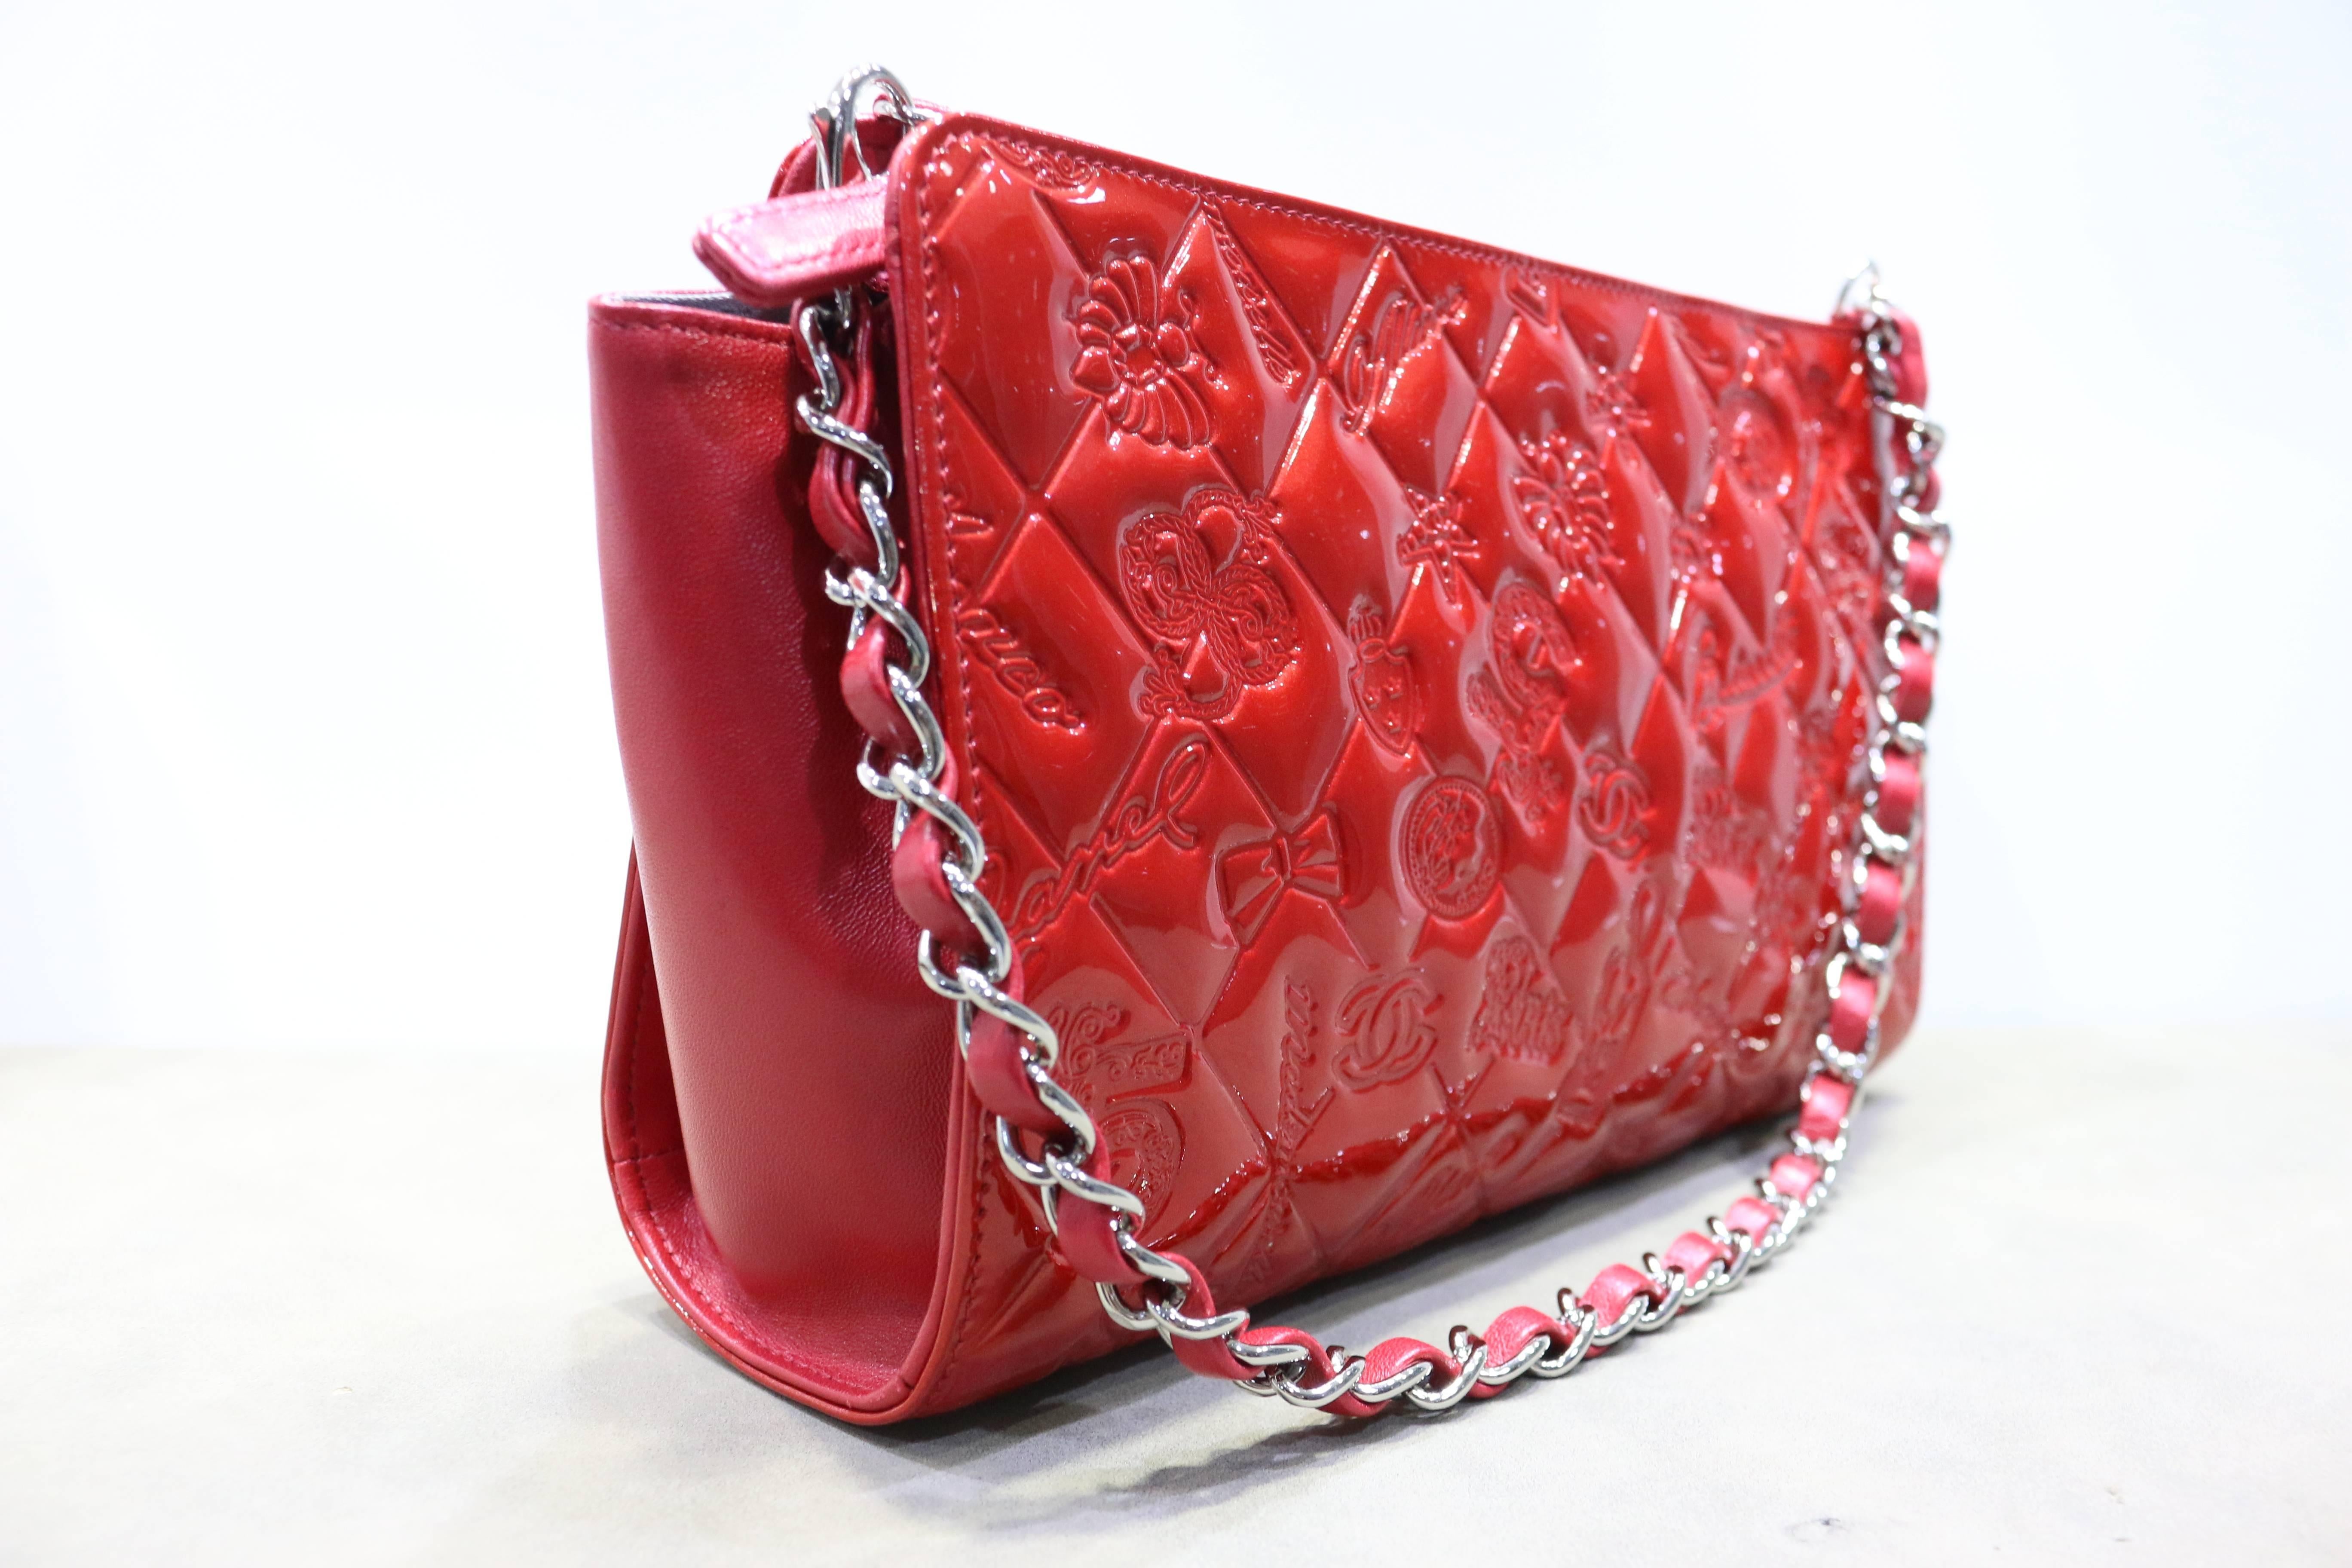 - Chanel red patent leather with red lamb leather on the side icon motif porch bag with red leather silver chain. It is so versatile that one side of the chain is detachable and you can carry as a clutch. 

- Made in Italy. 

- Measurement: W23cm x